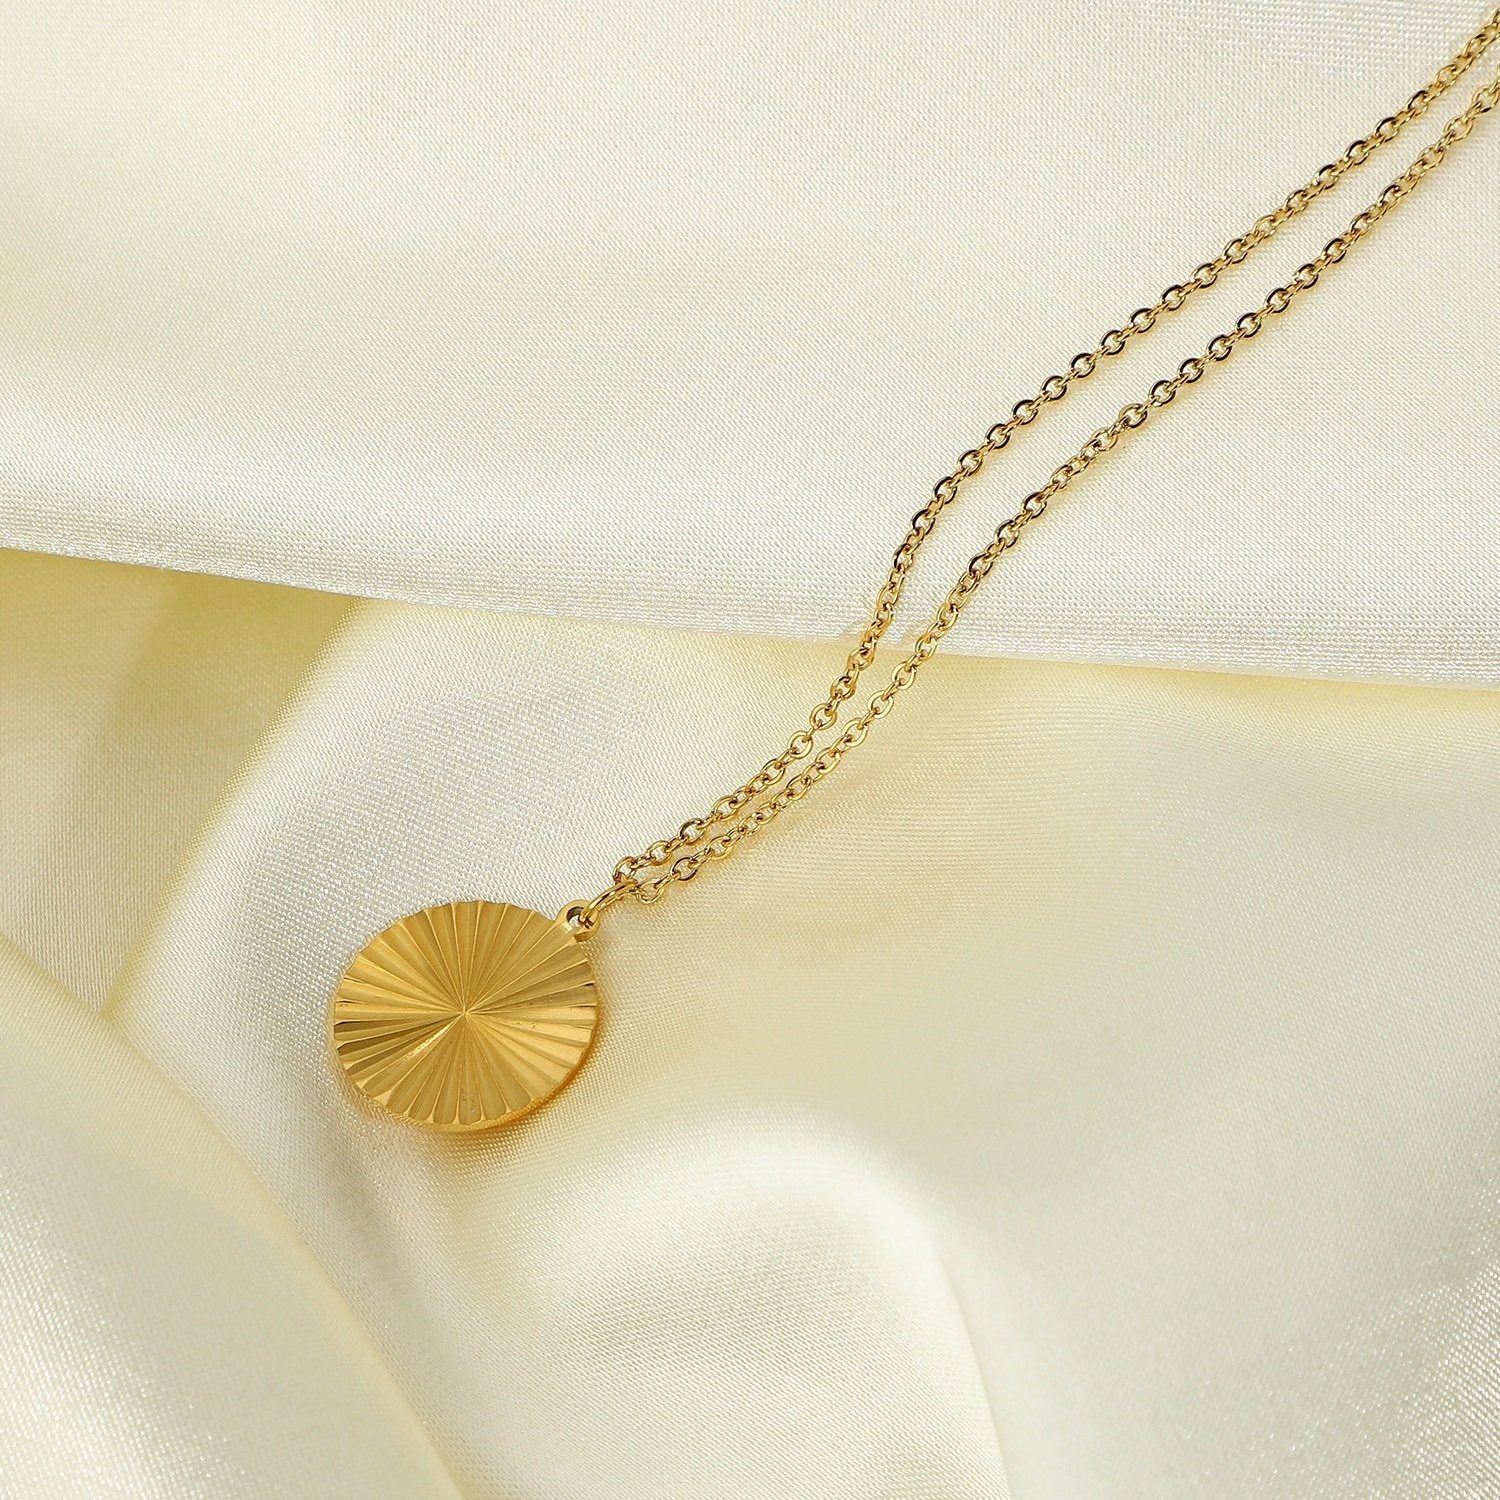 Gold Coin Charm Necklace, 18K Gold Filled Pendant Necklace, Gold Chain Necklace, Shining Sun Necklace, Coin Medallion Necklace, Gift For Her LATUKI 